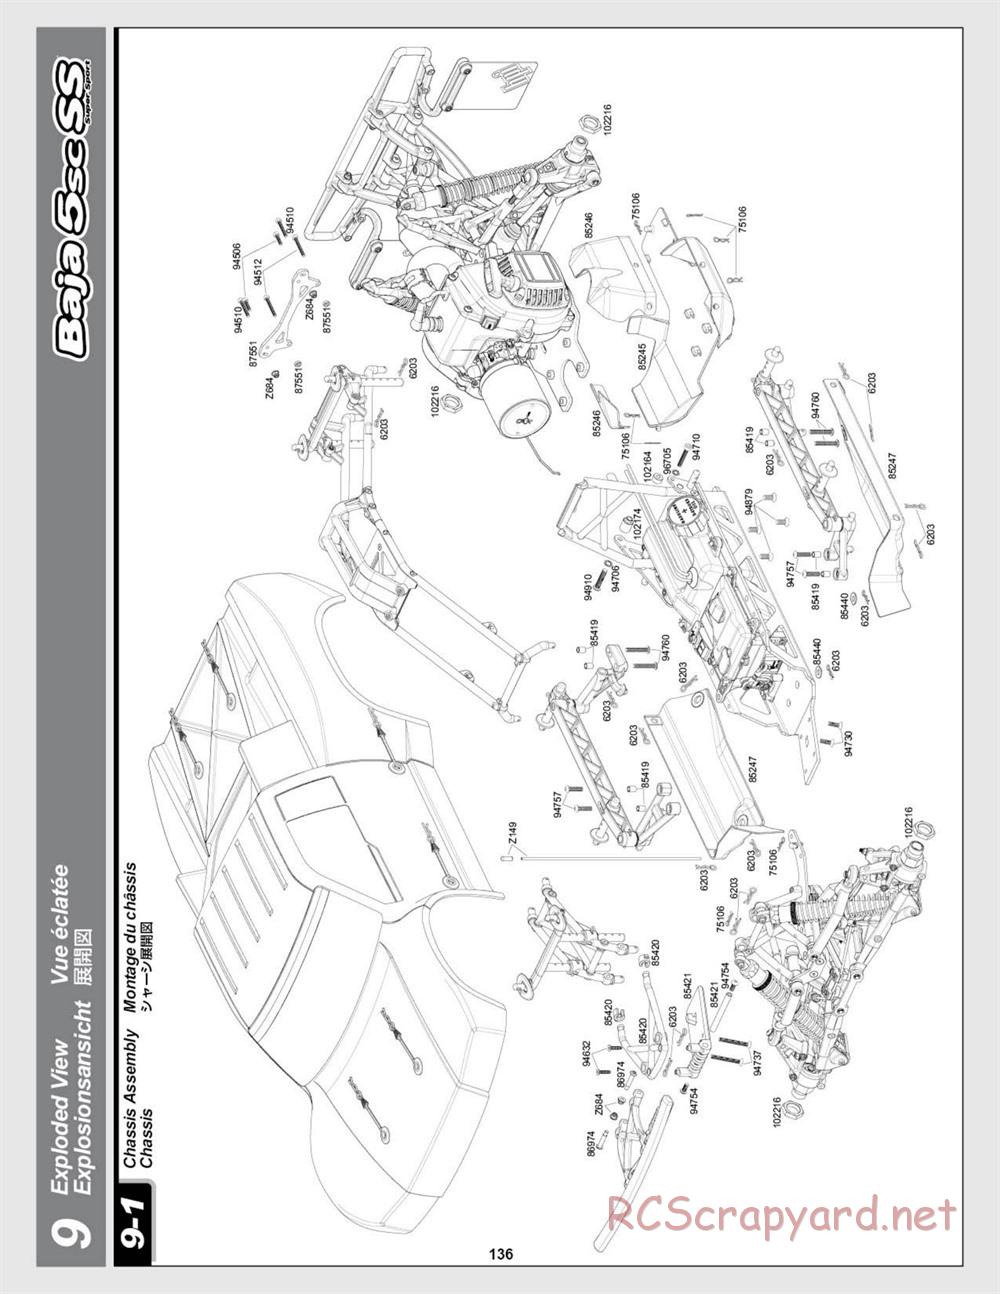 HPI - Baja 5SC SS - Exploded View - Page 136